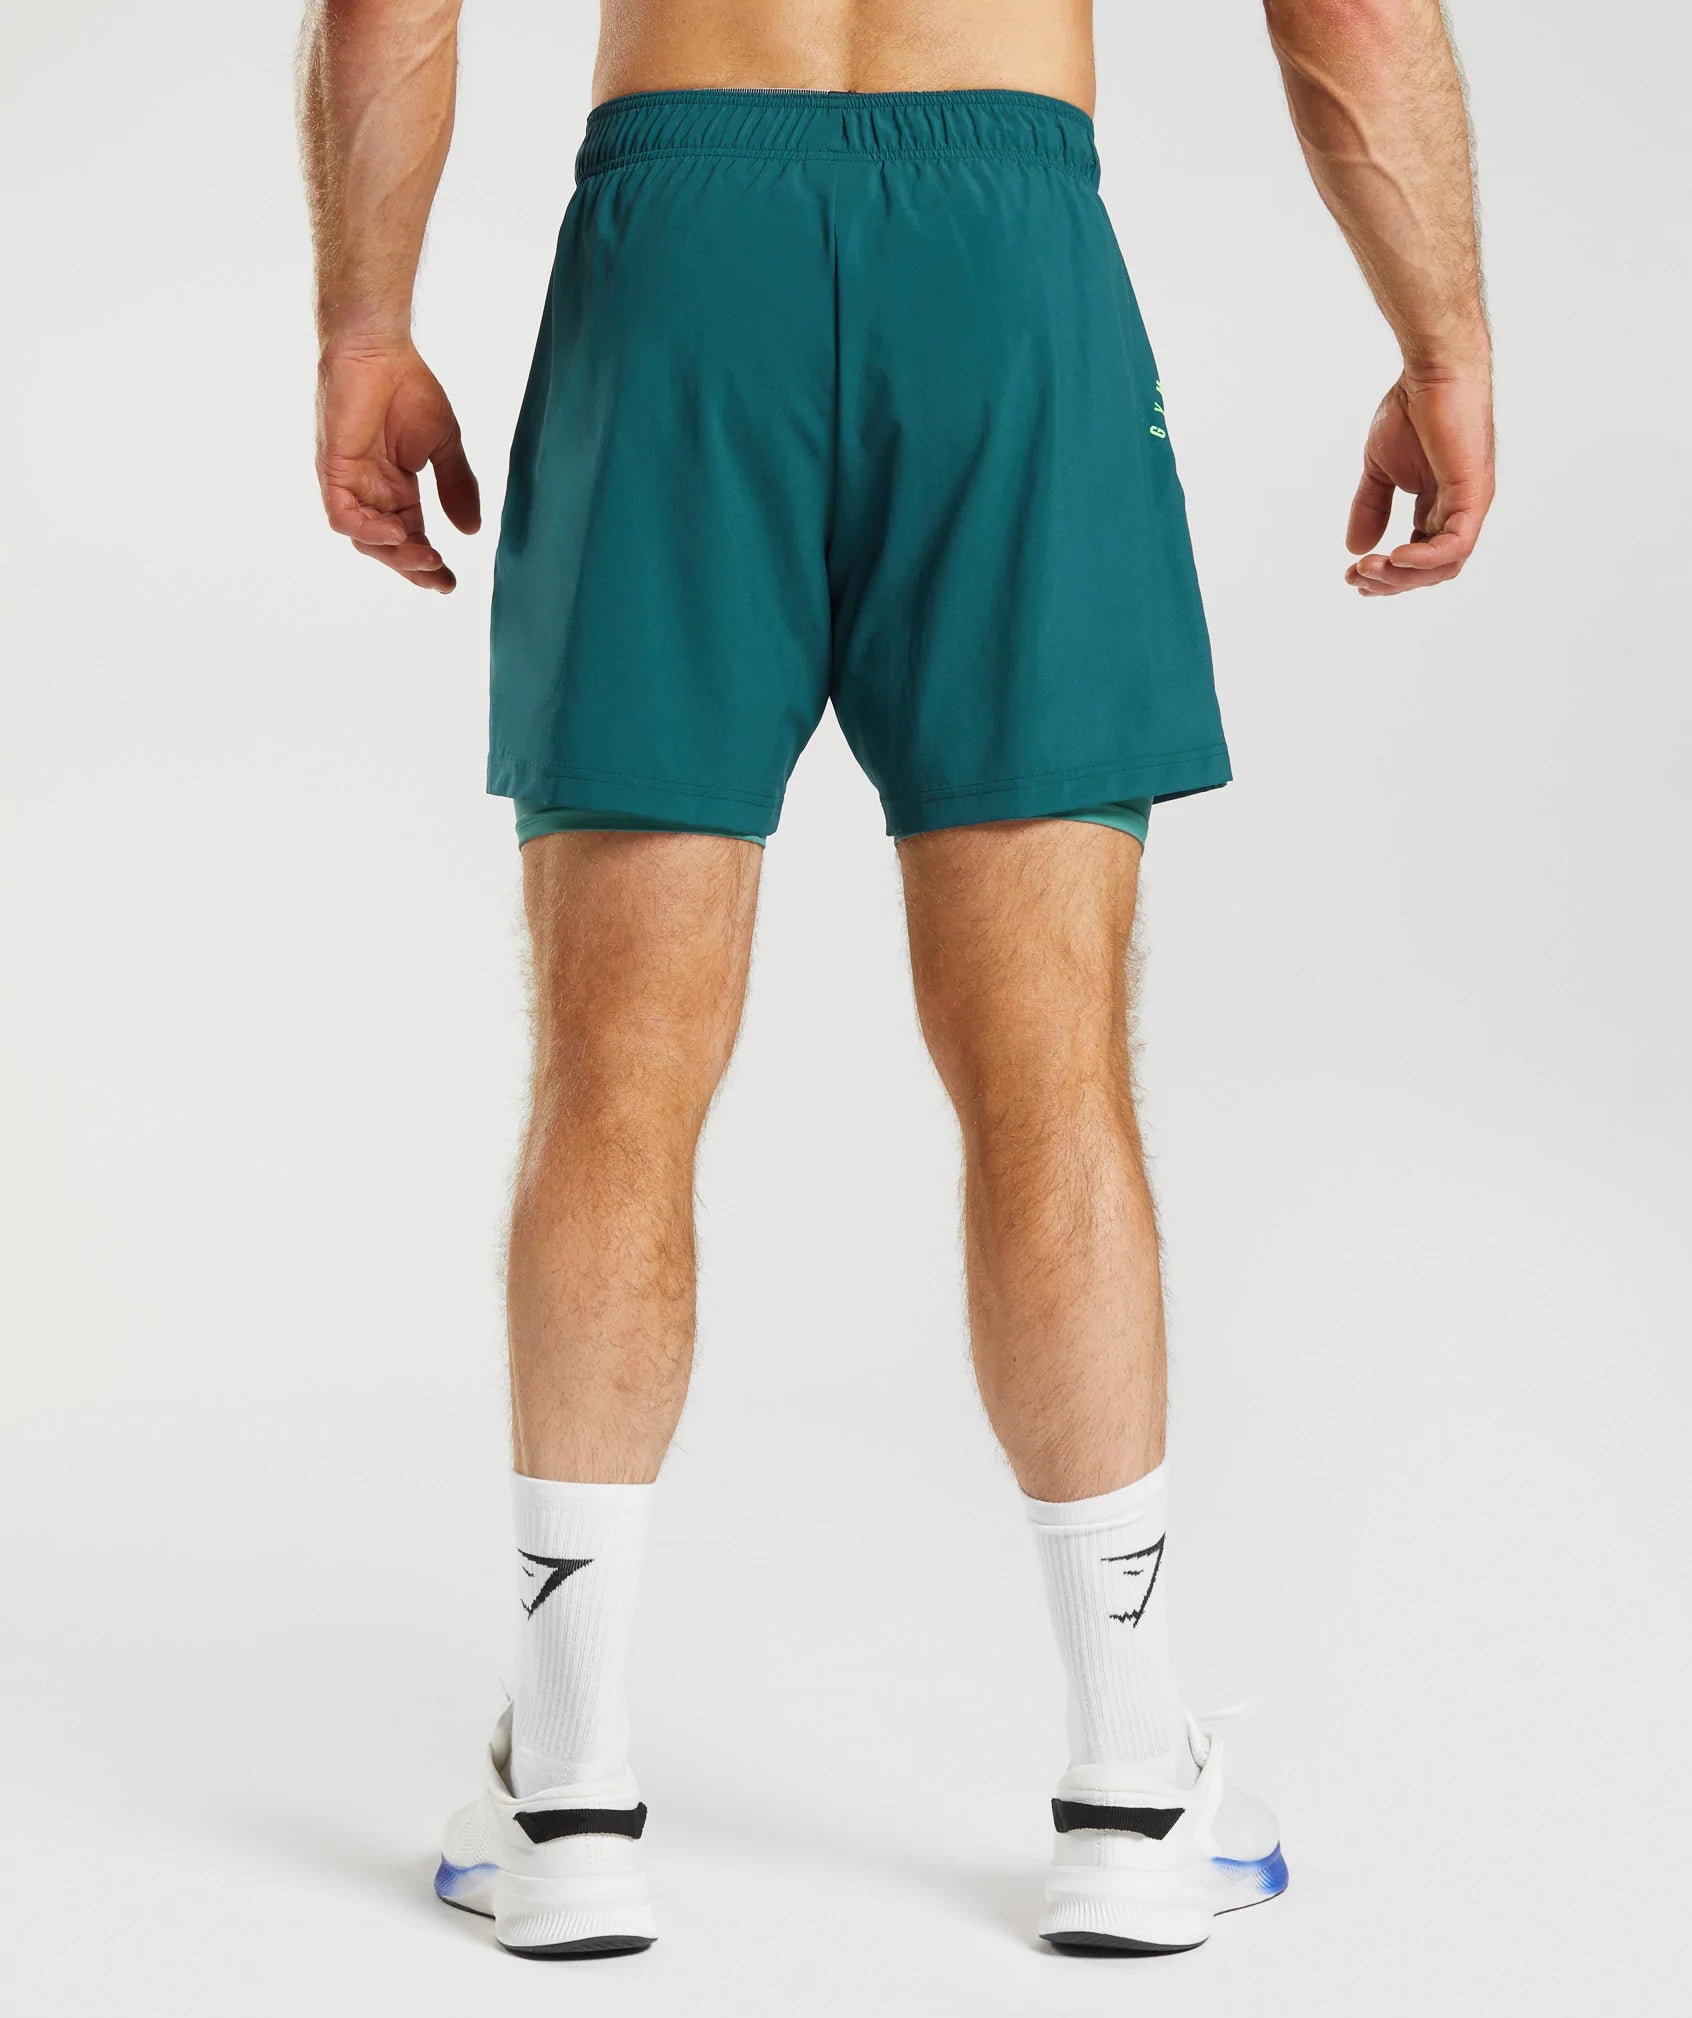 Sport 7" 2 In 1 Shorts in Winter Teal/Slate Blue - view 2